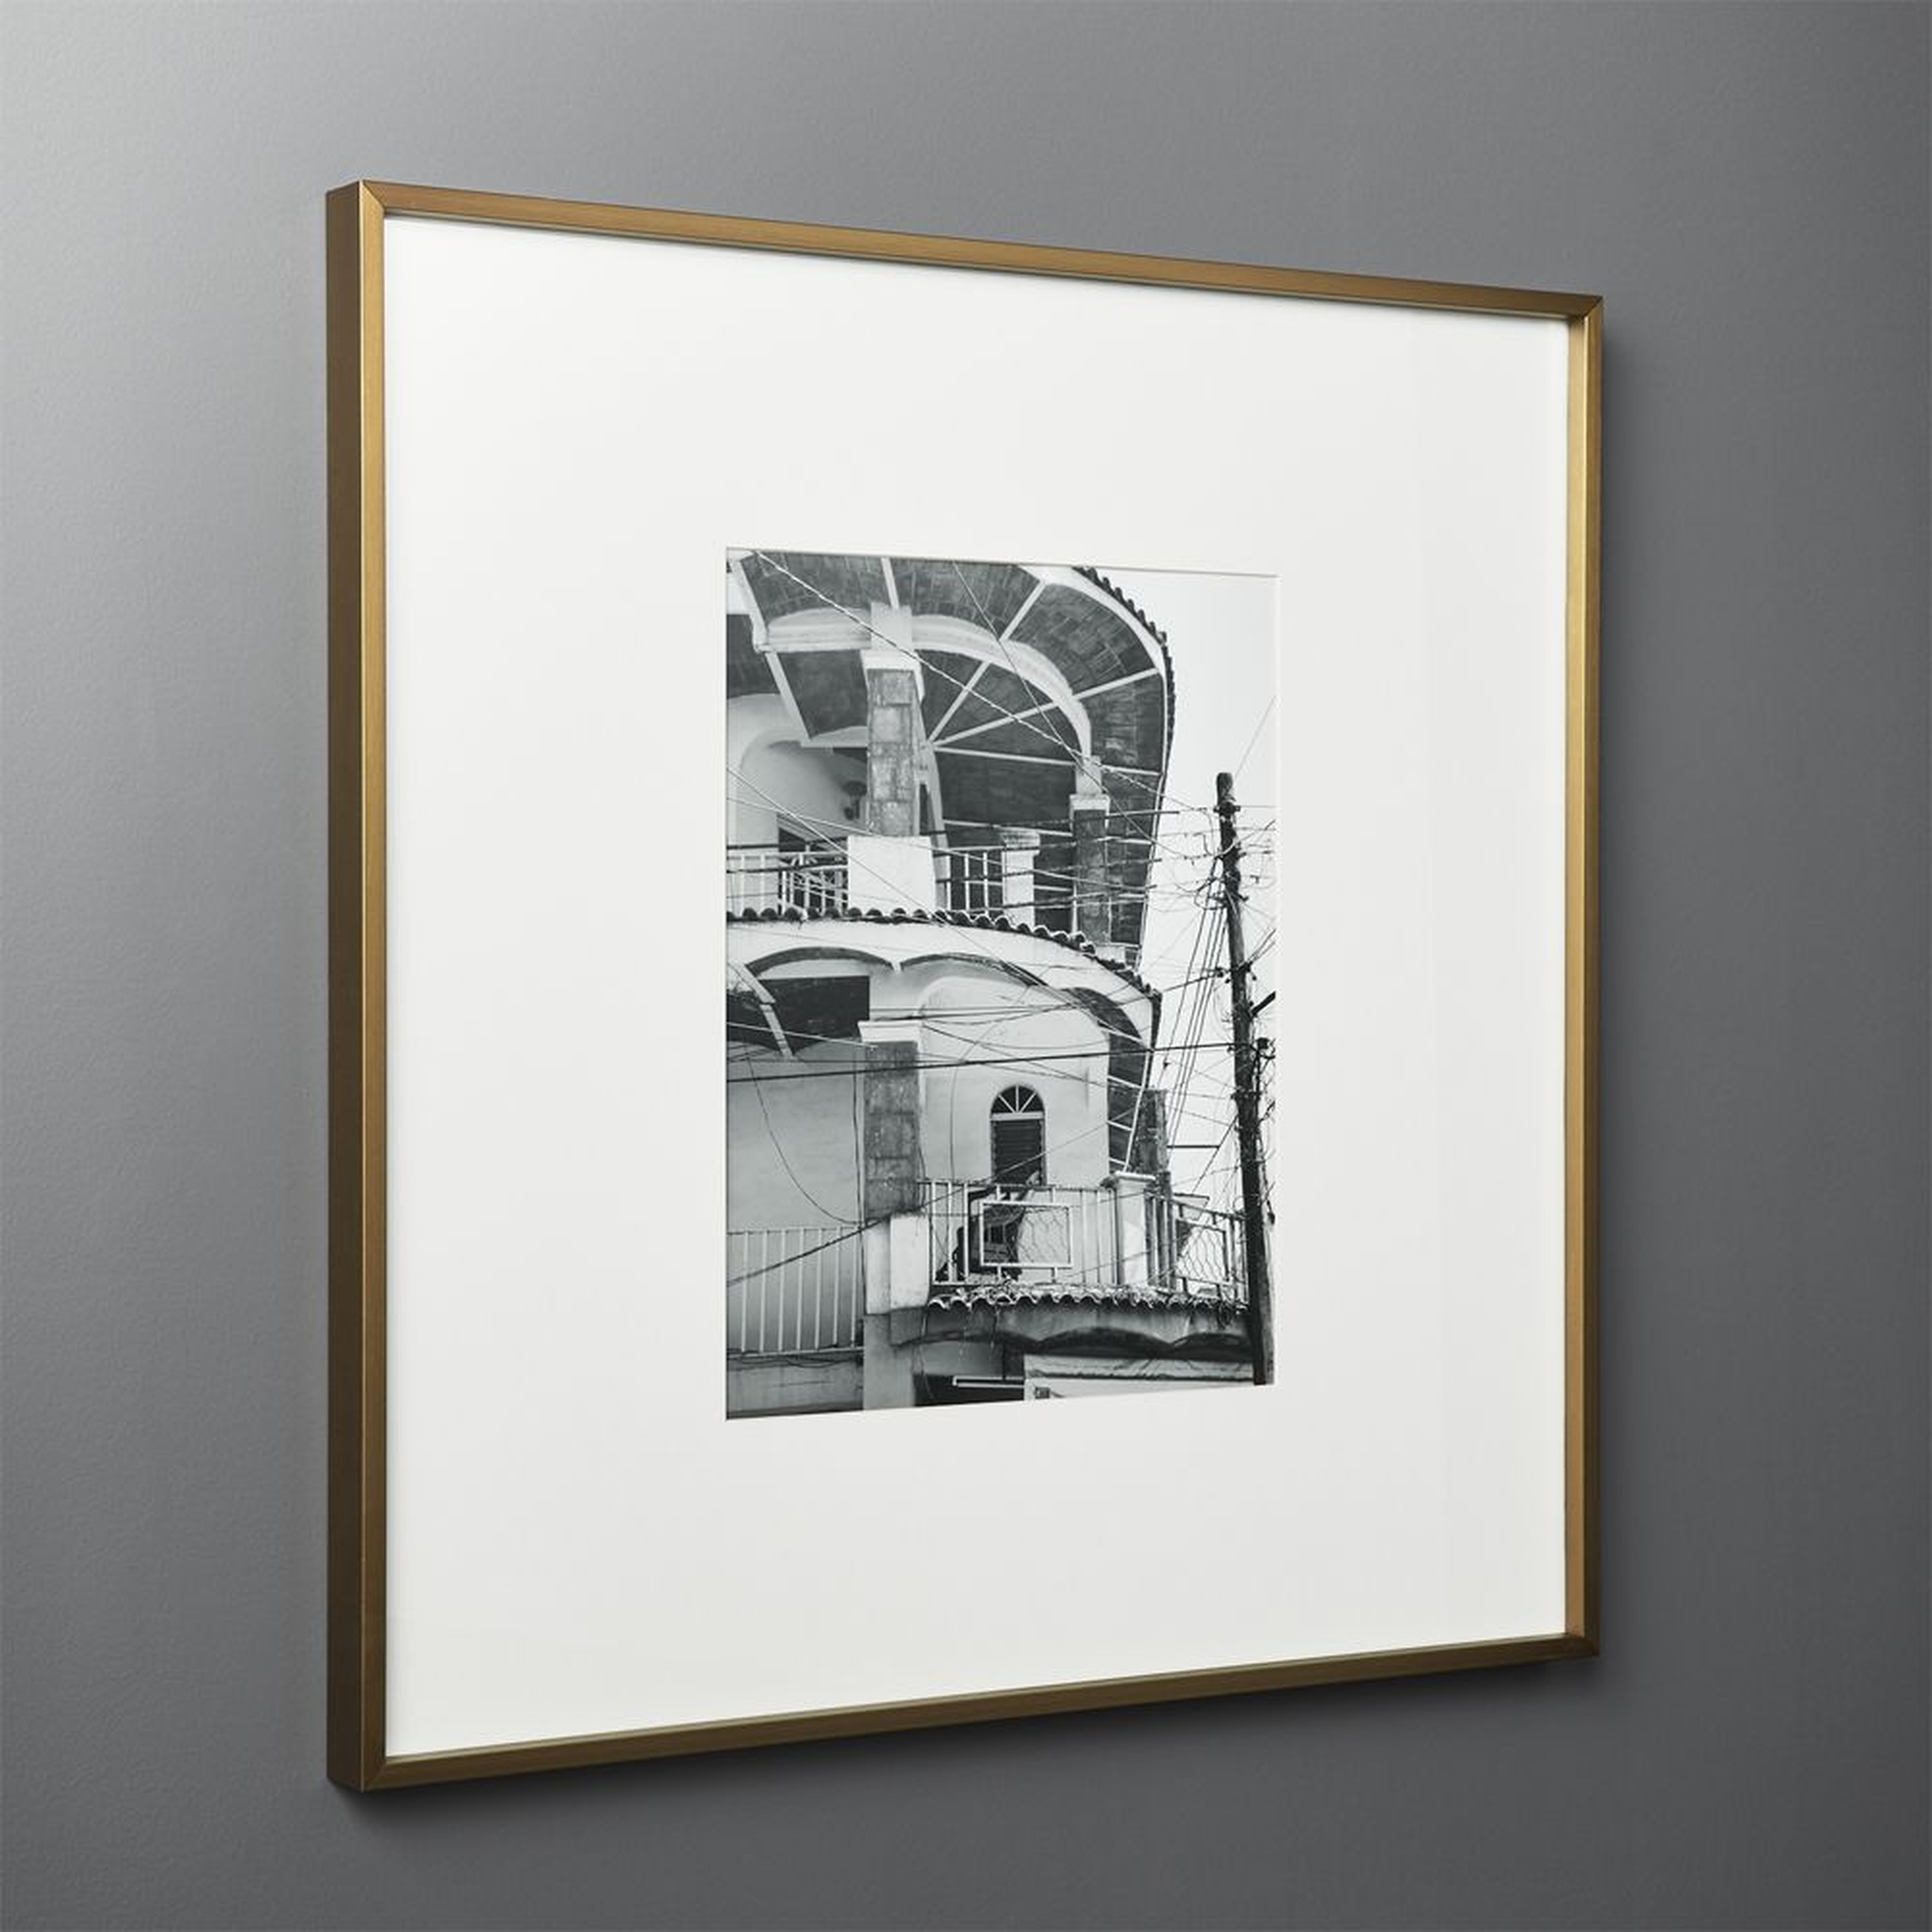 Gallery Brass Frame with White Mat 11x14 - CB2